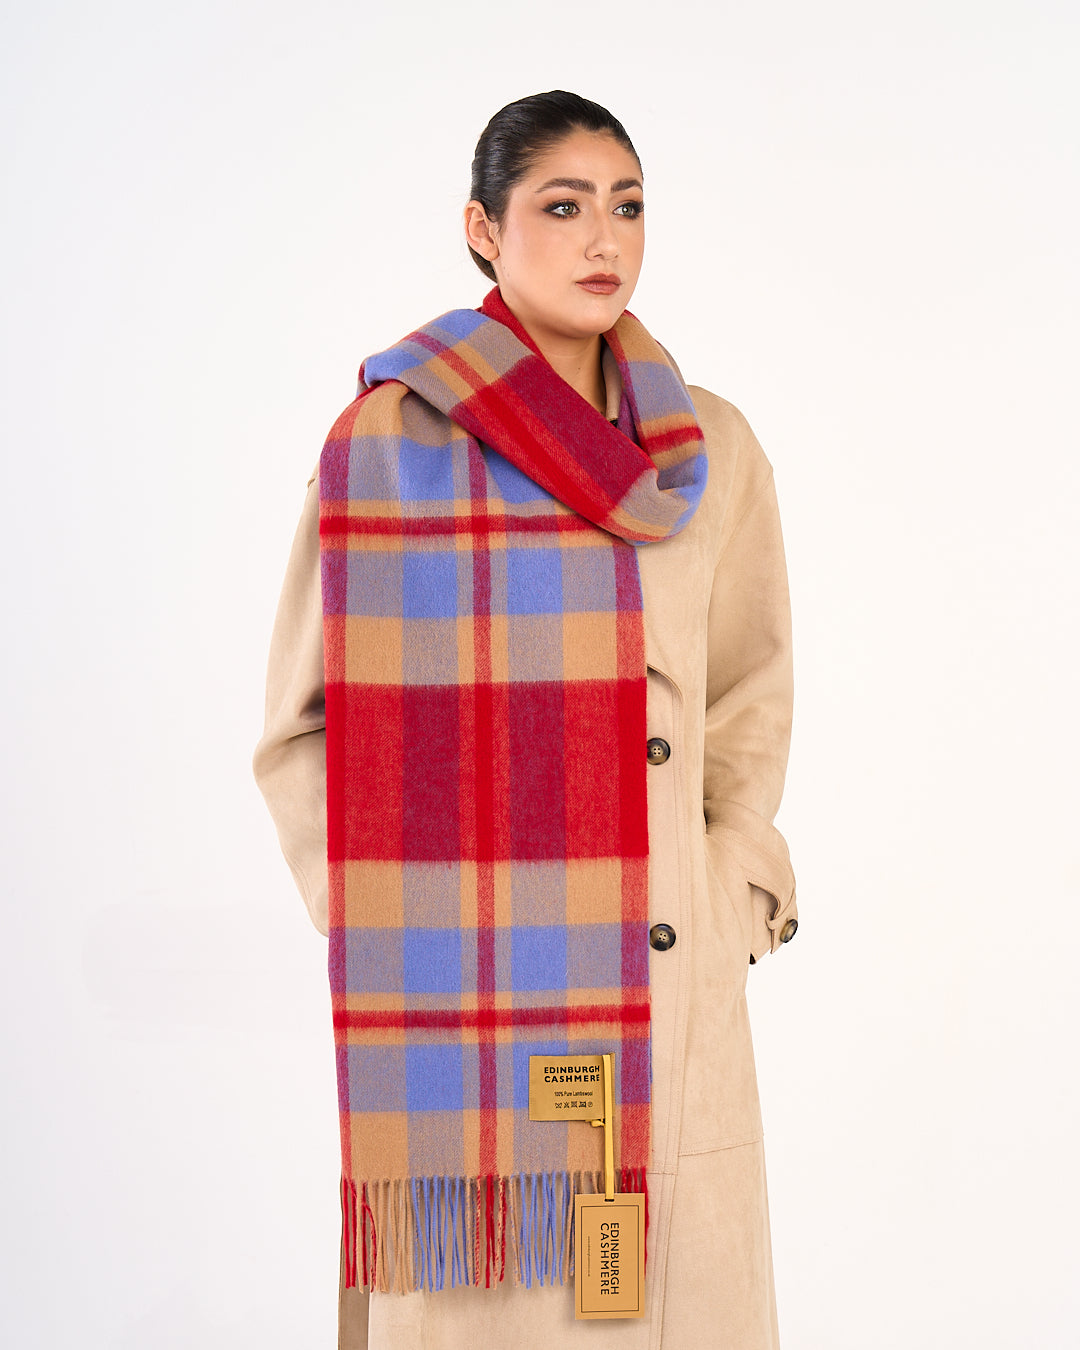 Cashmere Scarves for All Seasons